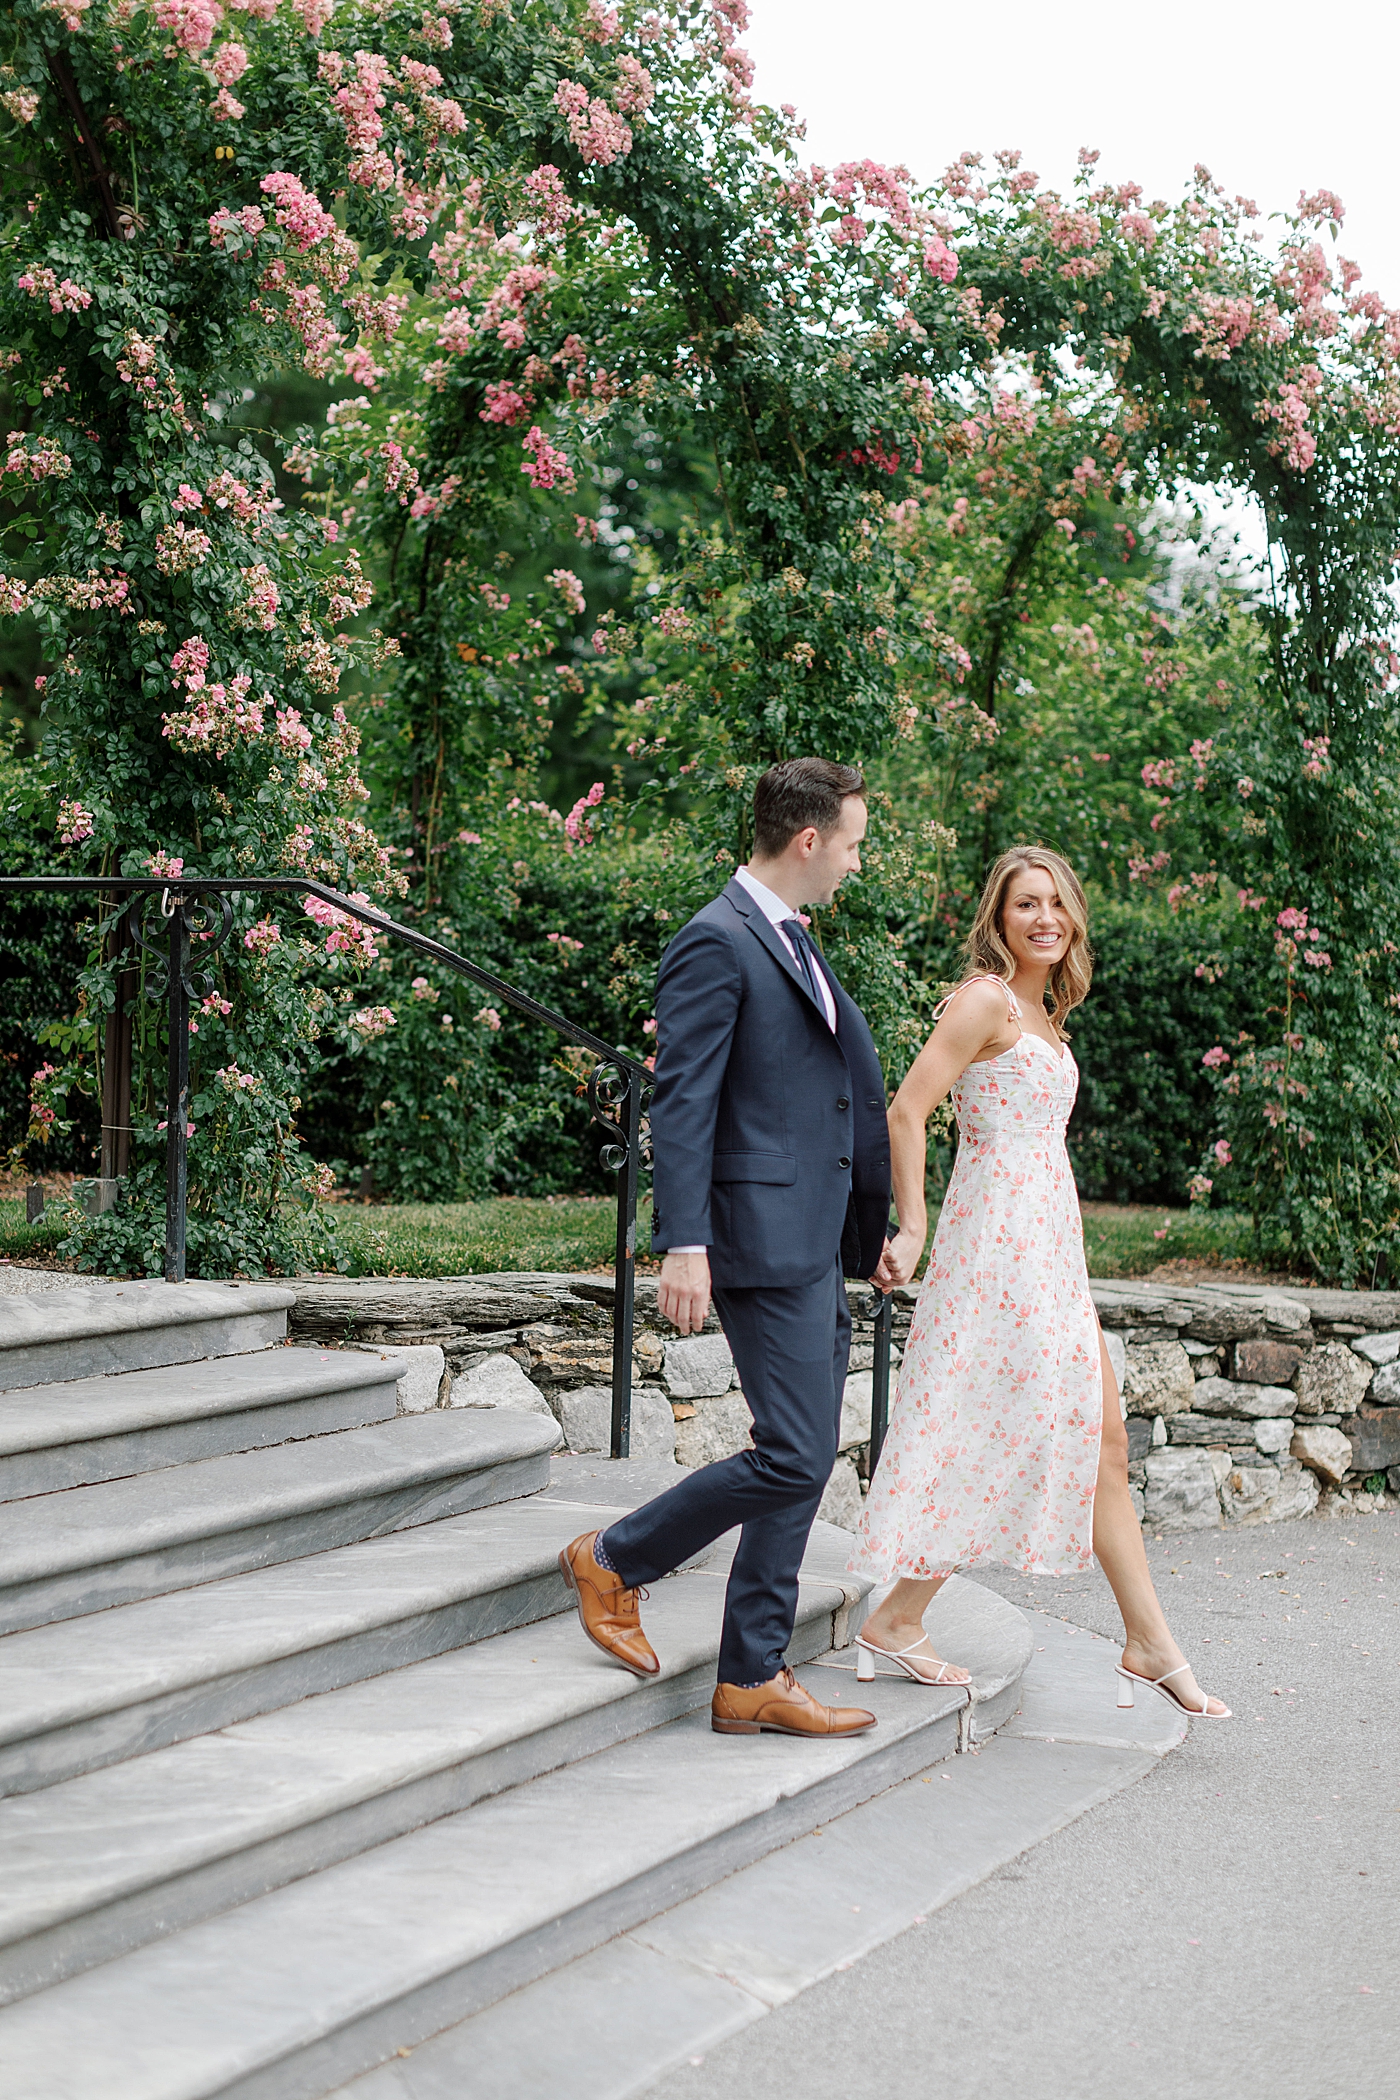 Couple smiling while walking down stairs | Photo by Hope Helmuth Photography